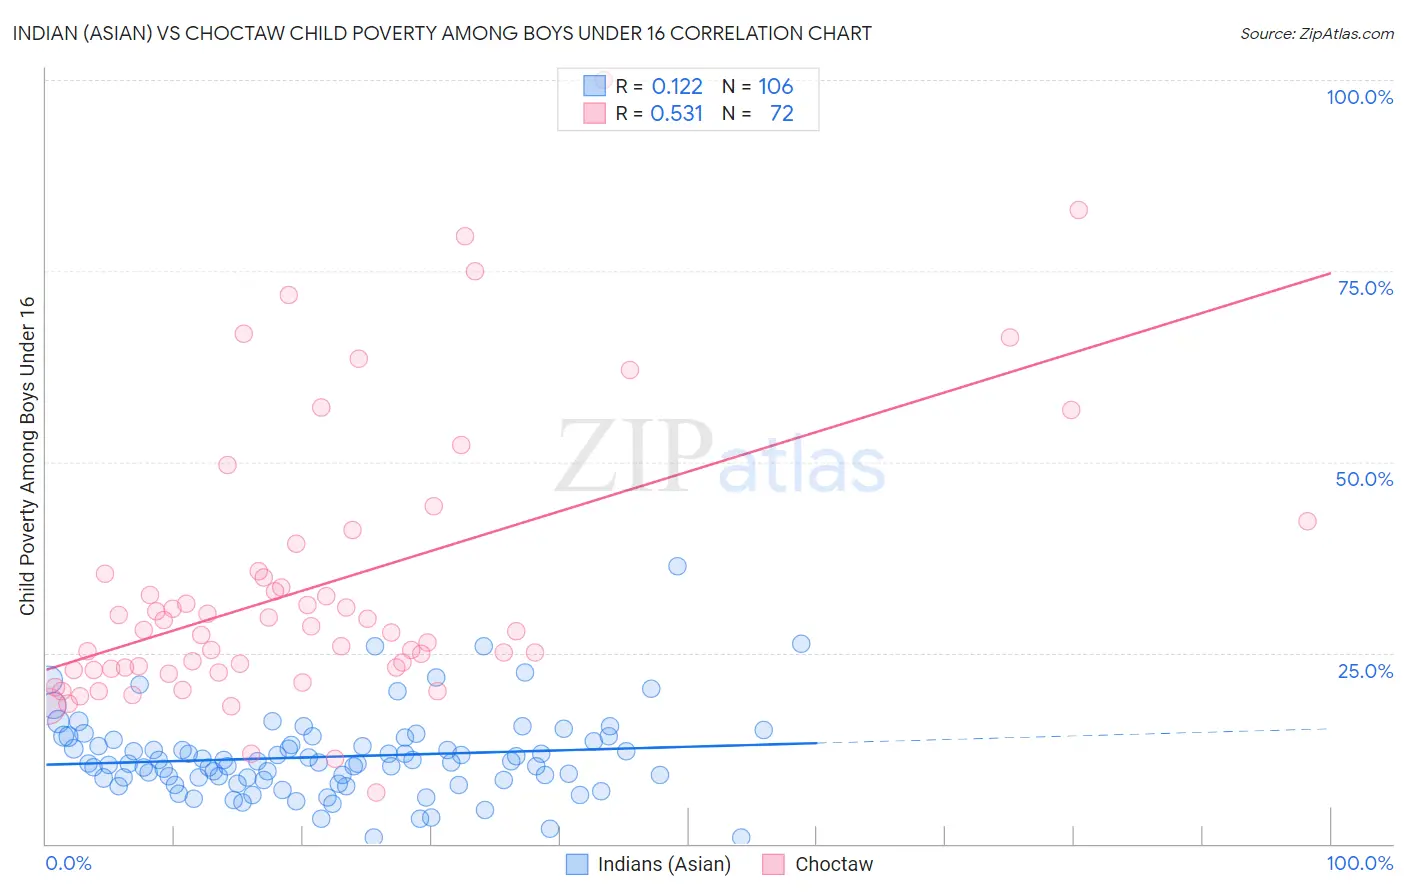 Indian (Asian) vs Choctaw Child Poverty Among Boys Under 16